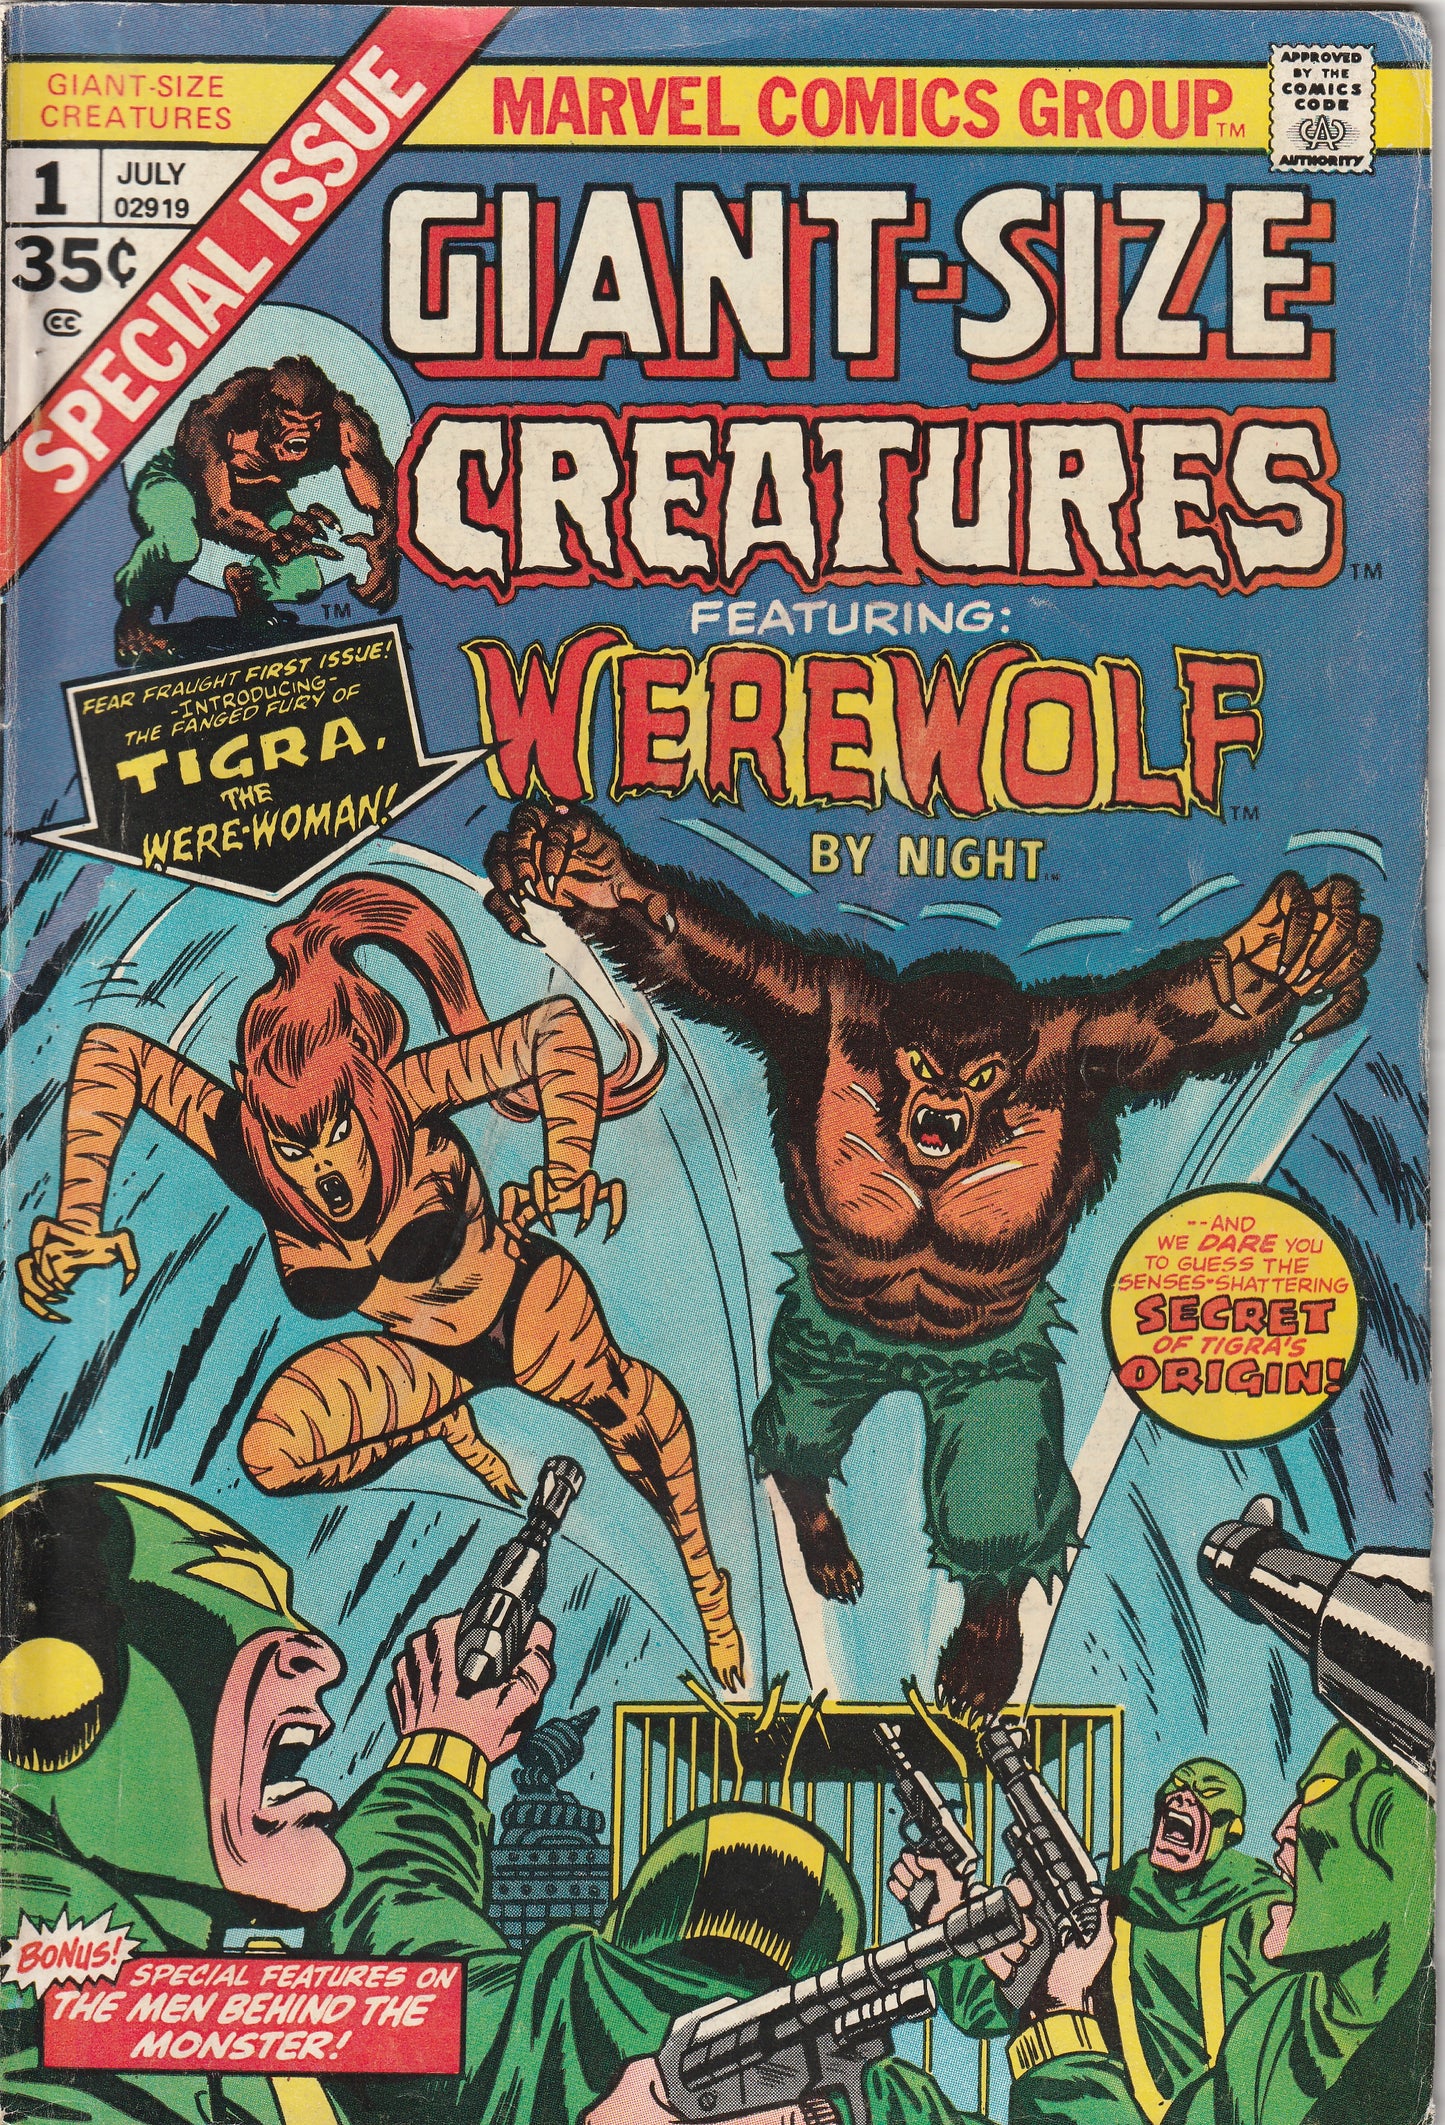 Giant Size Creatures #1 (1974) - Featuring Werewolf by Night (1st Appearance Tigra)